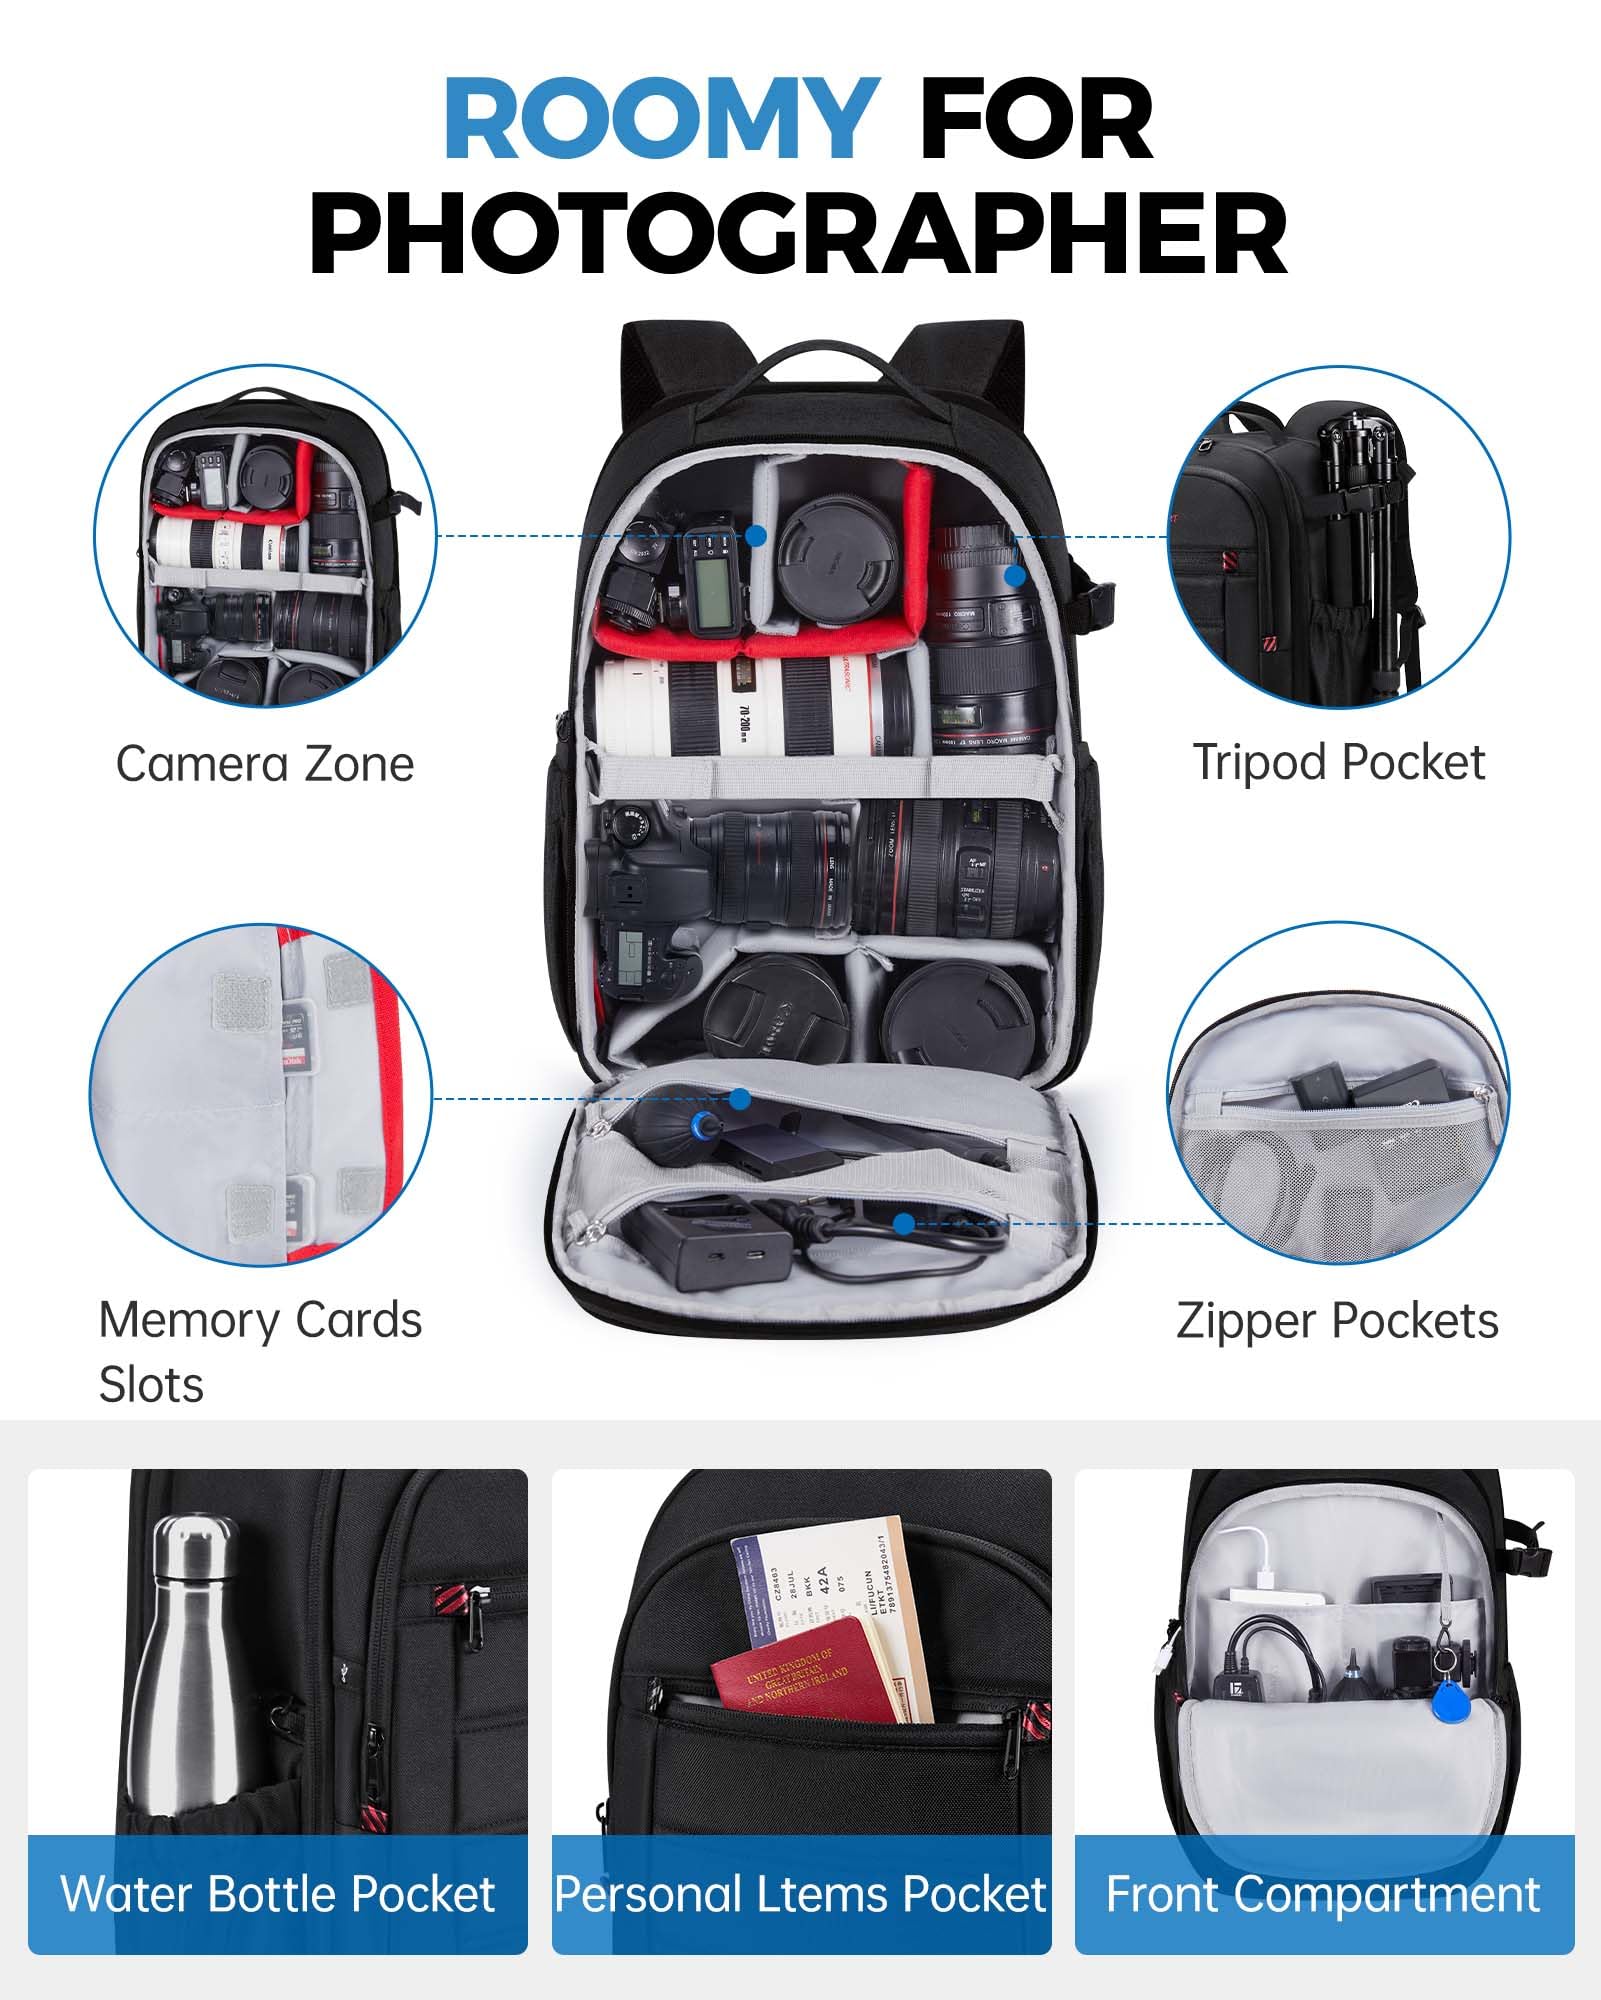 BAGSMART Camera Backpack, Expandable DSLR SLR Camera Bags for Photographers, Photography Travel Backpack with 15.6" Laptop Compartment, Rain Cover & Tripod Holder, Black